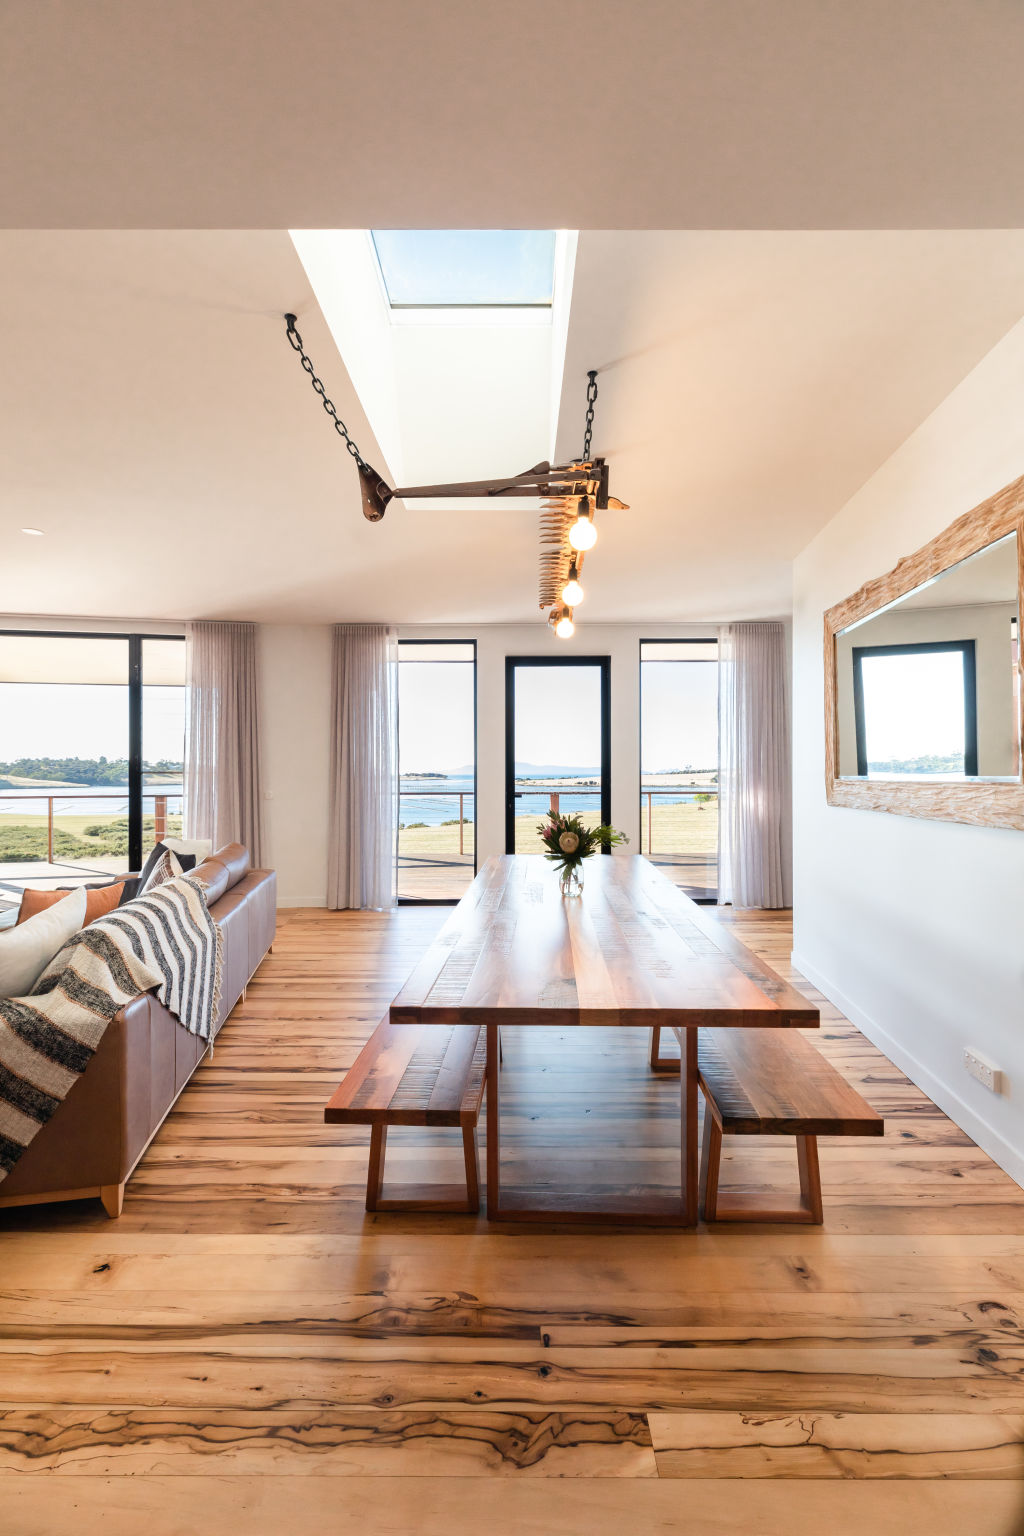 Unsurprisingly, the view served as the main inspiration for the home’s design. Photo: Natasha Mulhall